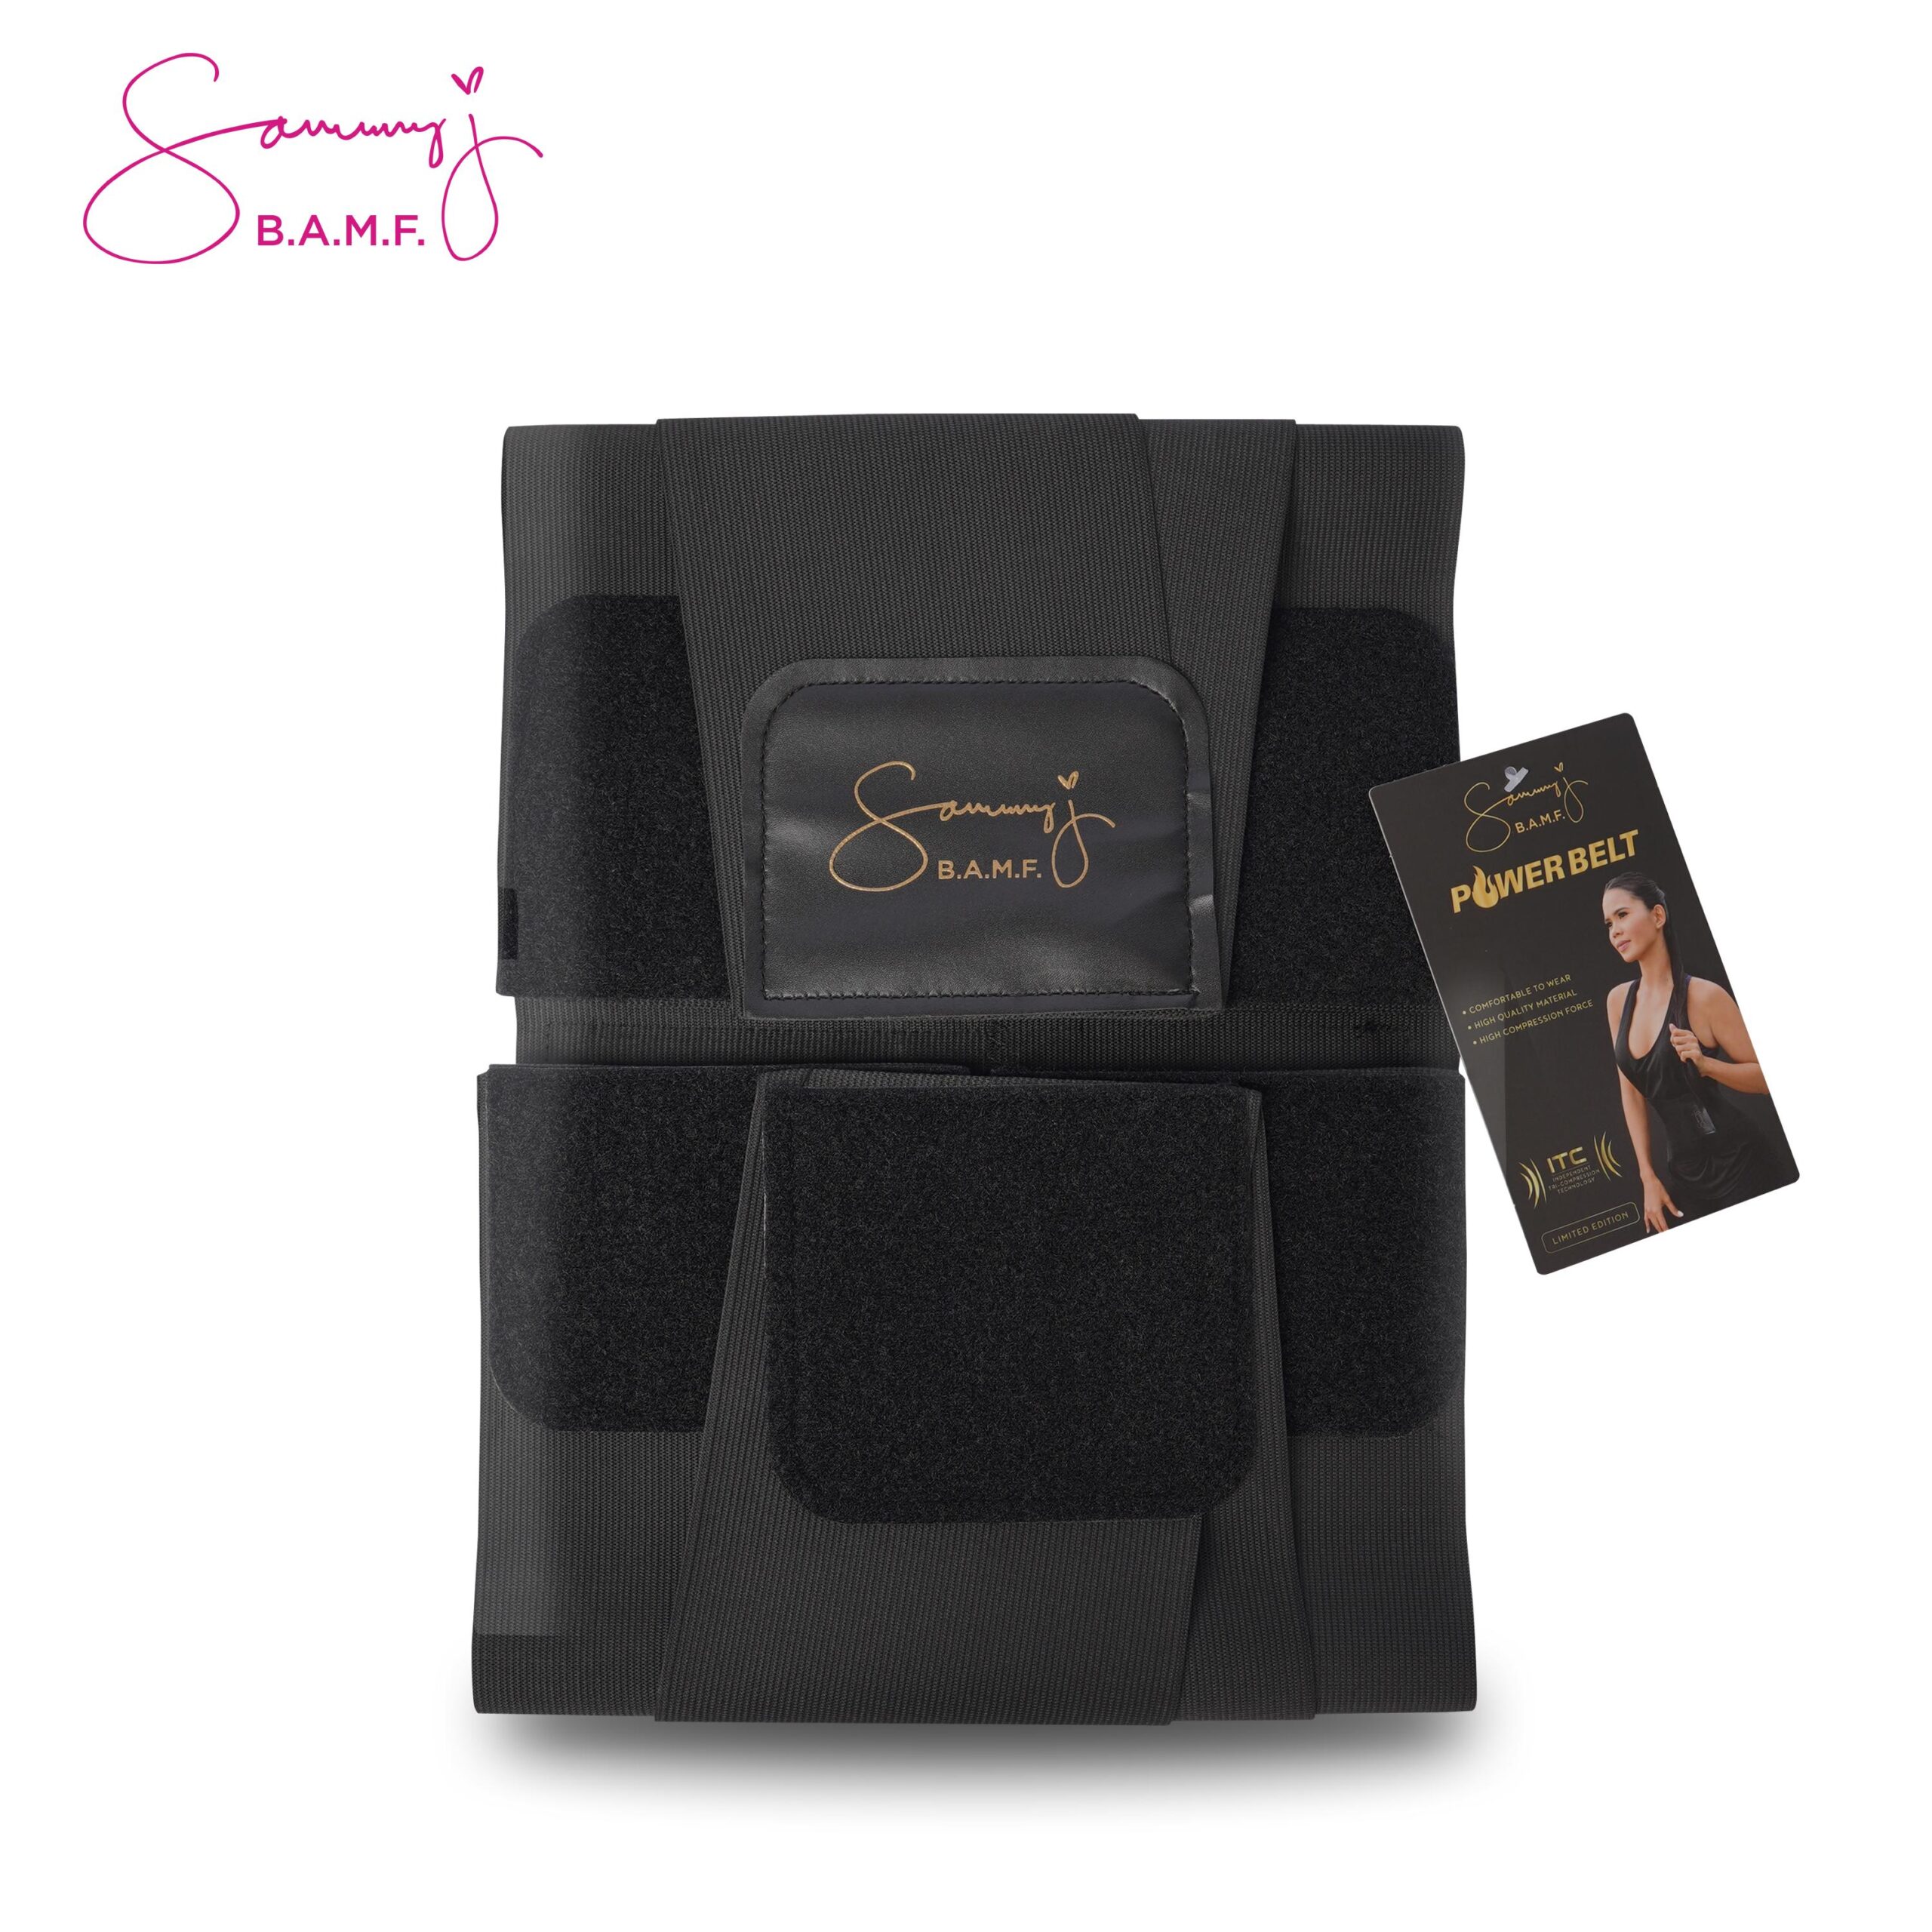 Sammy J Gold Power Belt 5.0 (Available in 4 sizes XS/S/M/L/XL